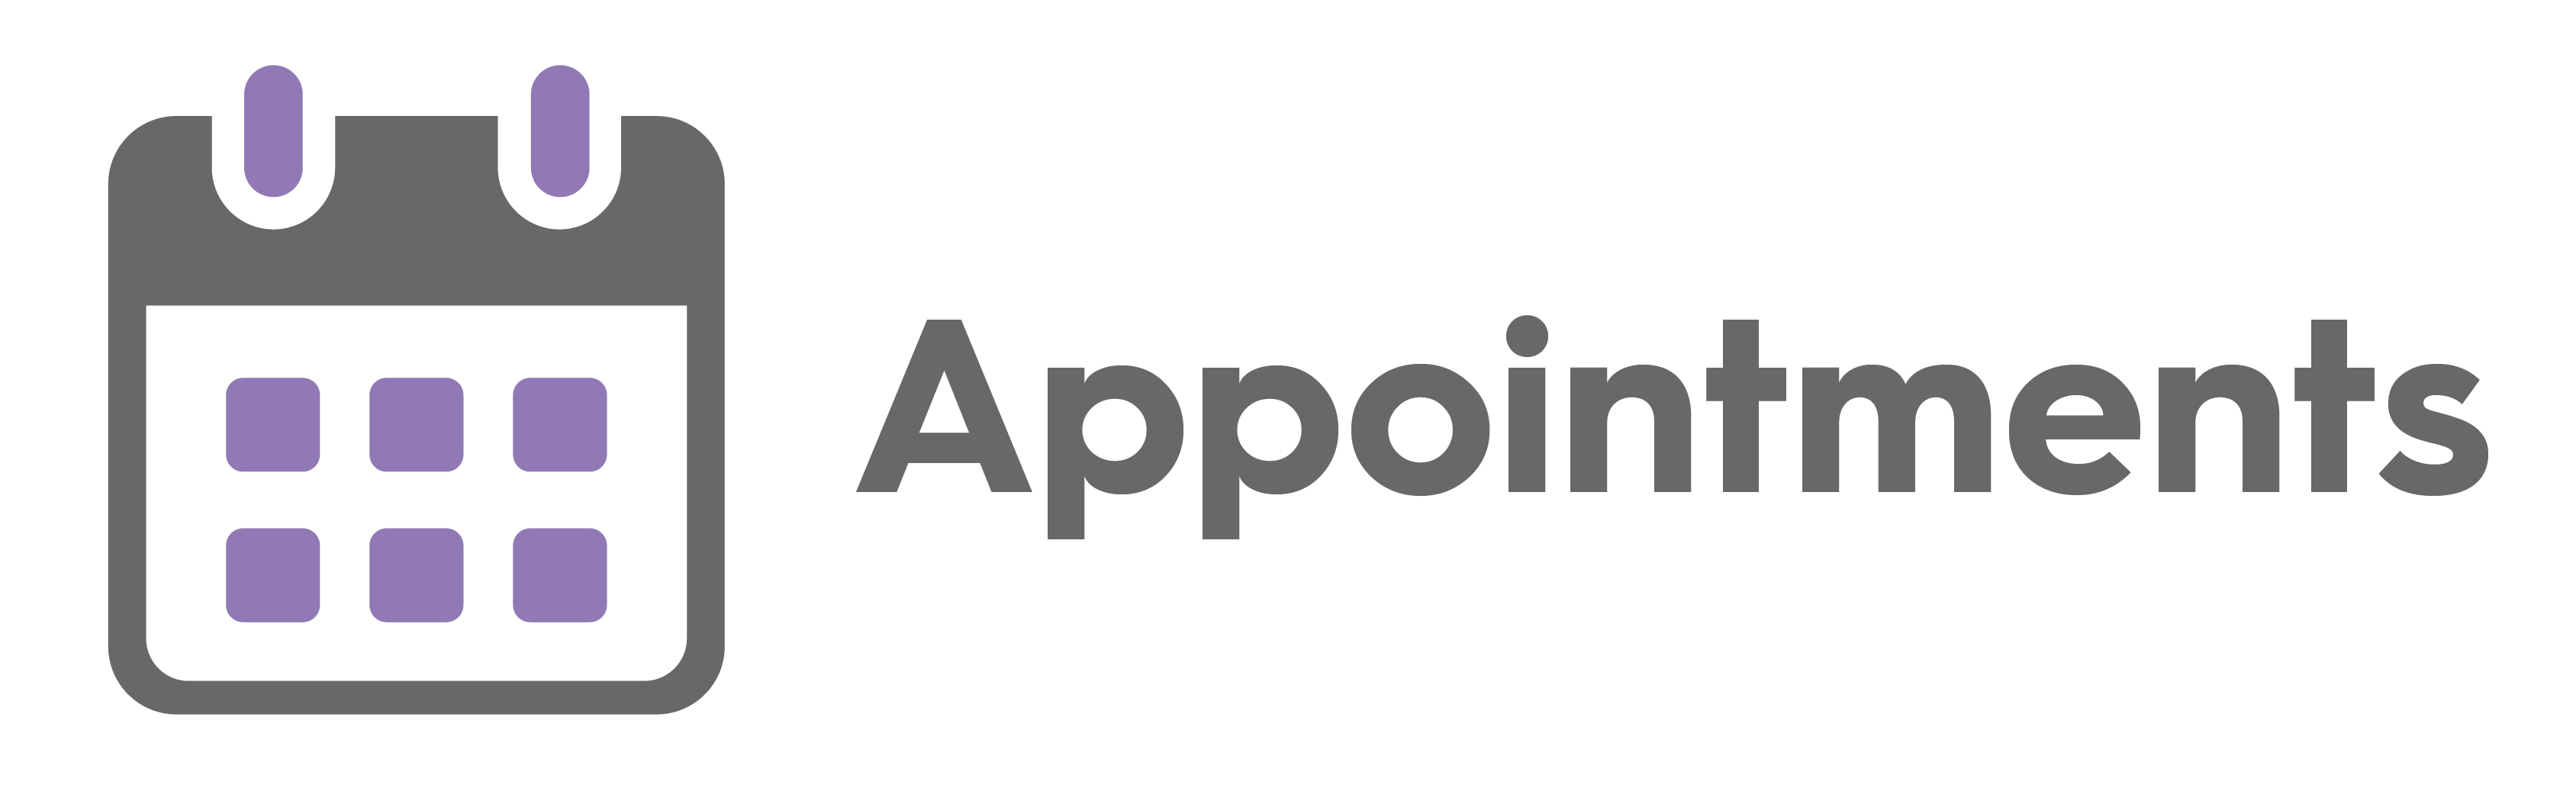 Appointments logo